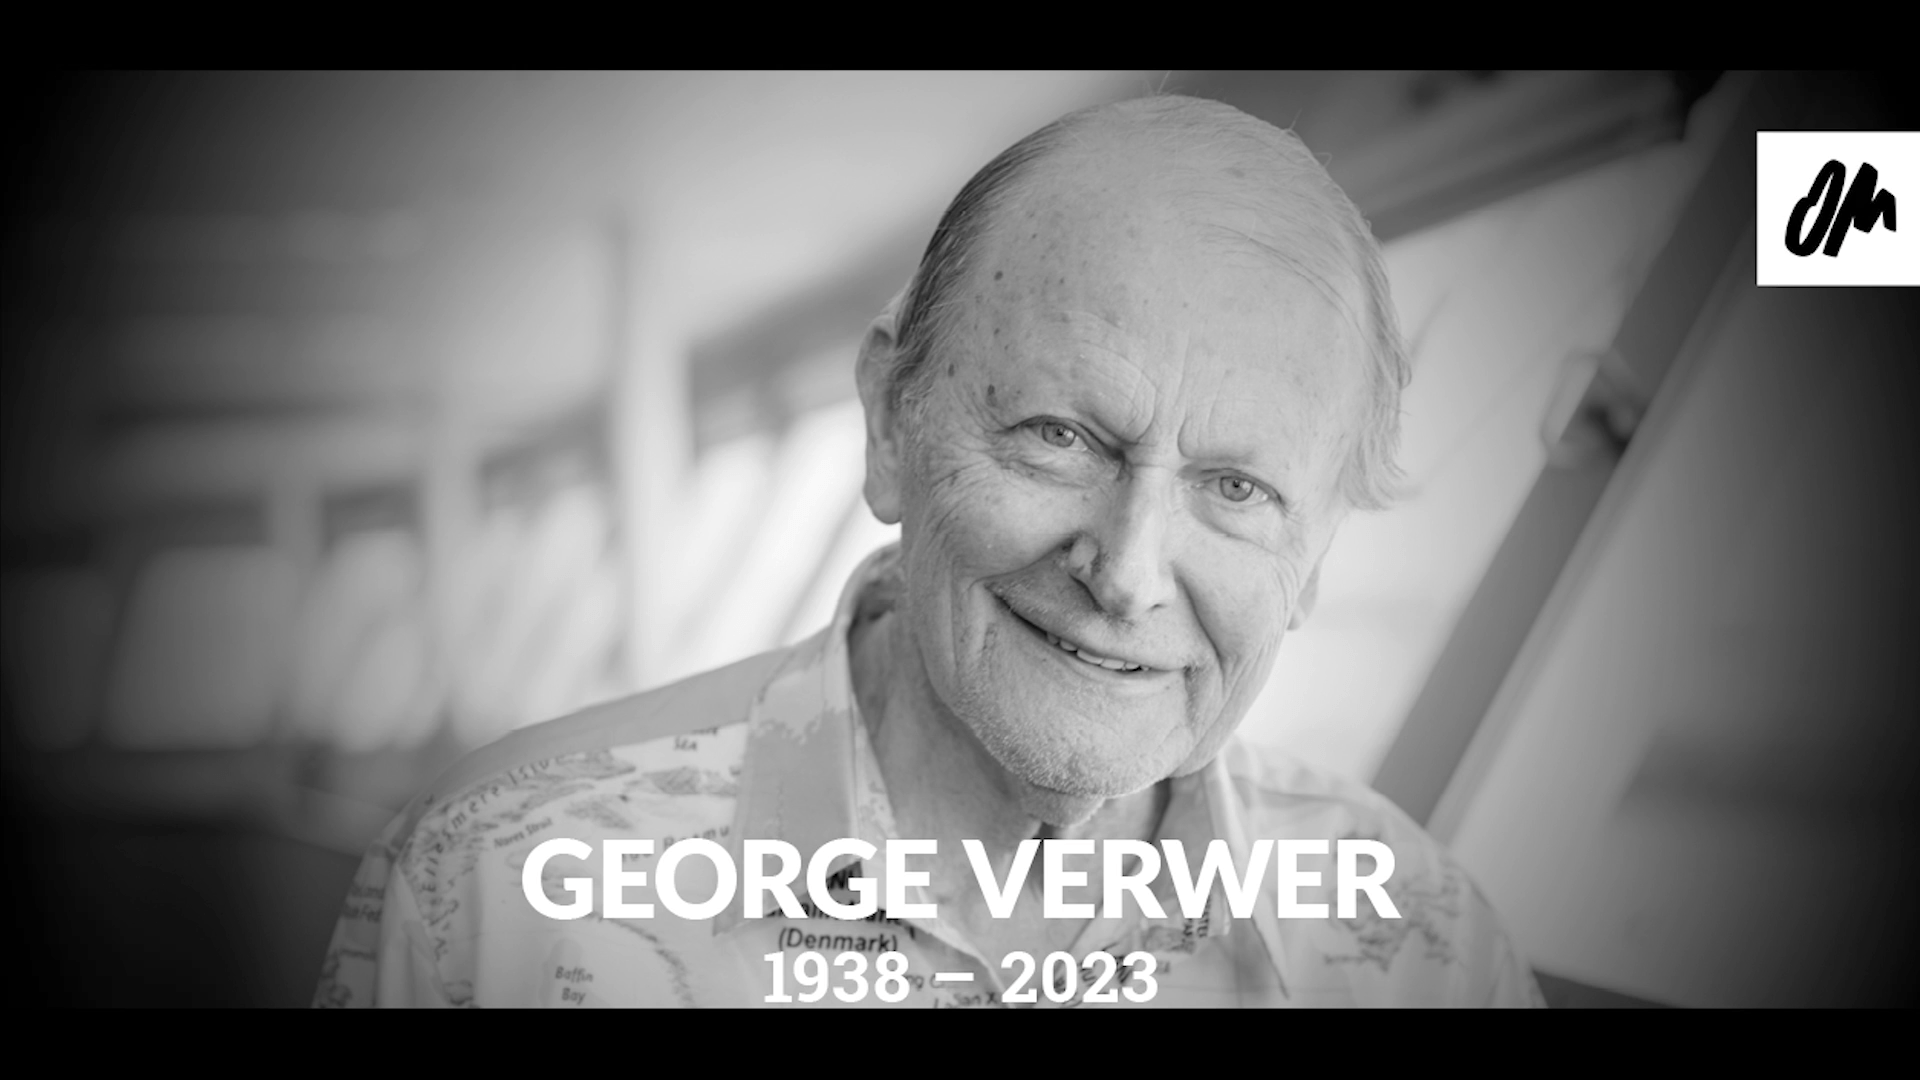 The death has been announced of George Verwer, who founded the Christian mission agency, Operation Mobilisation, and directed it for 45 years